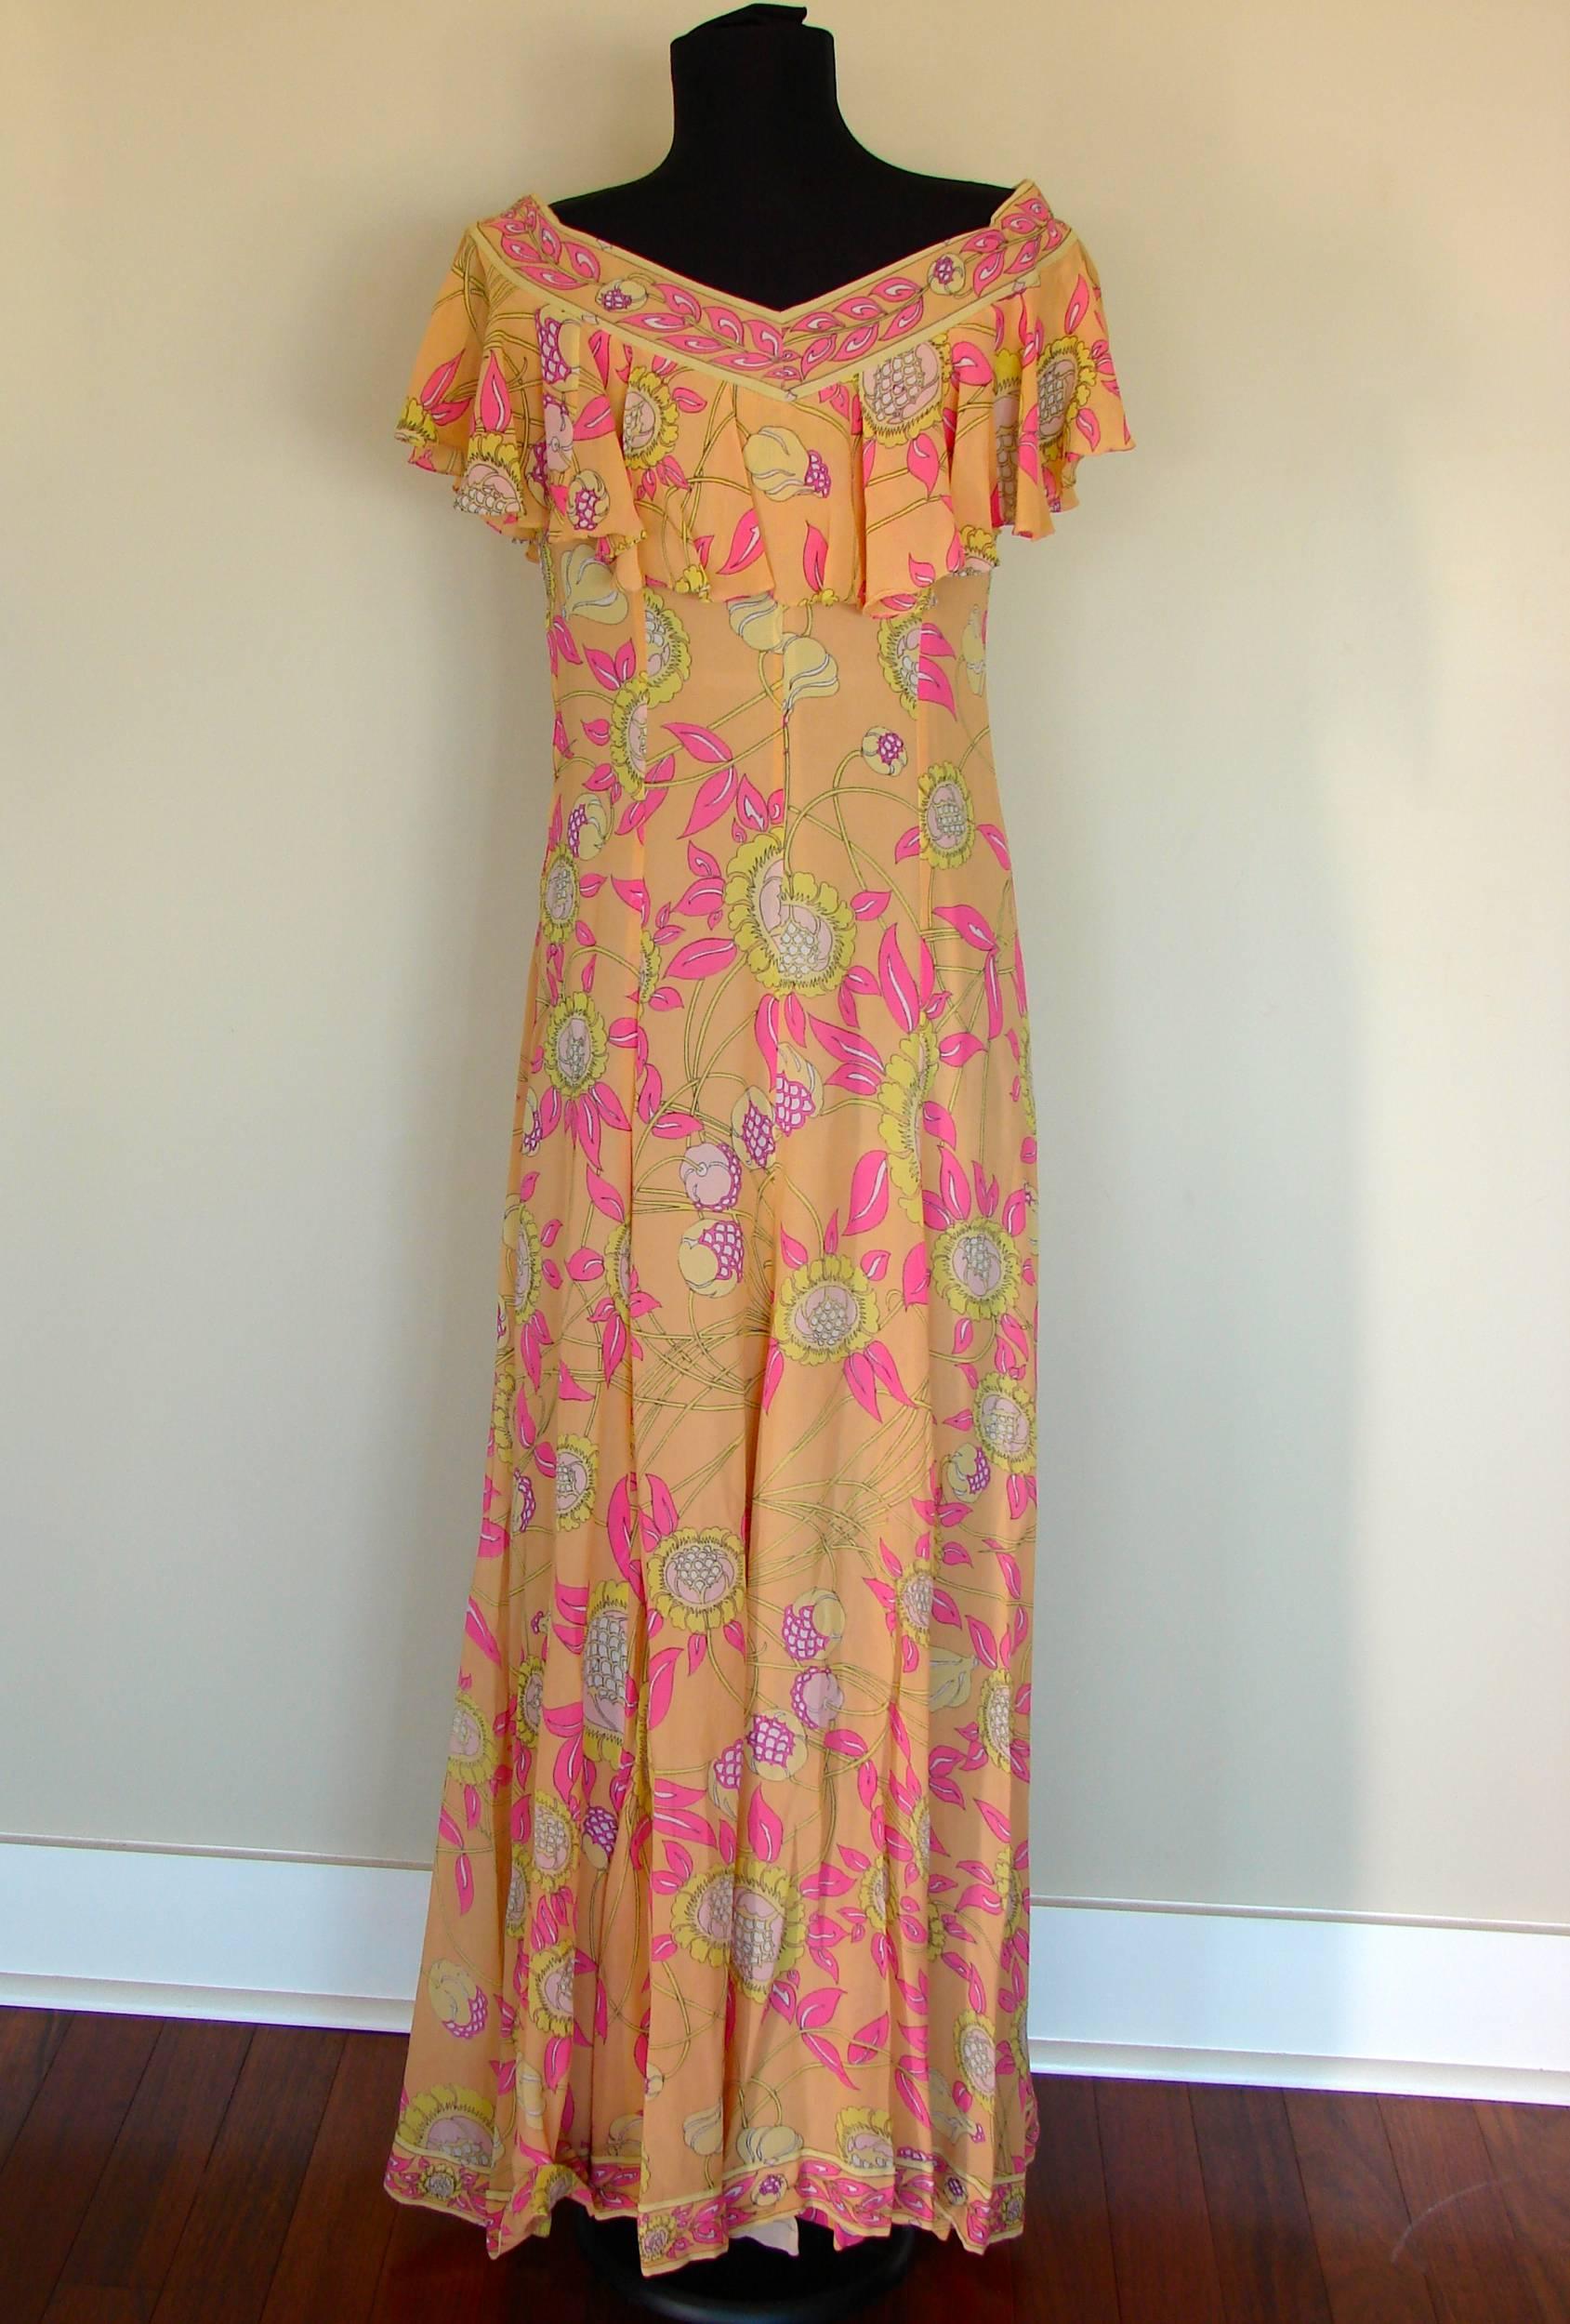 Incredible silk chiffon maxi dress from Emilio Pucci features a bold sunflower print in shades of peach, pink, yellow and white. Ruffled top can be worn off shoulders if so desired. Fastens with side zip and fully lined in nude crepe. This piece is